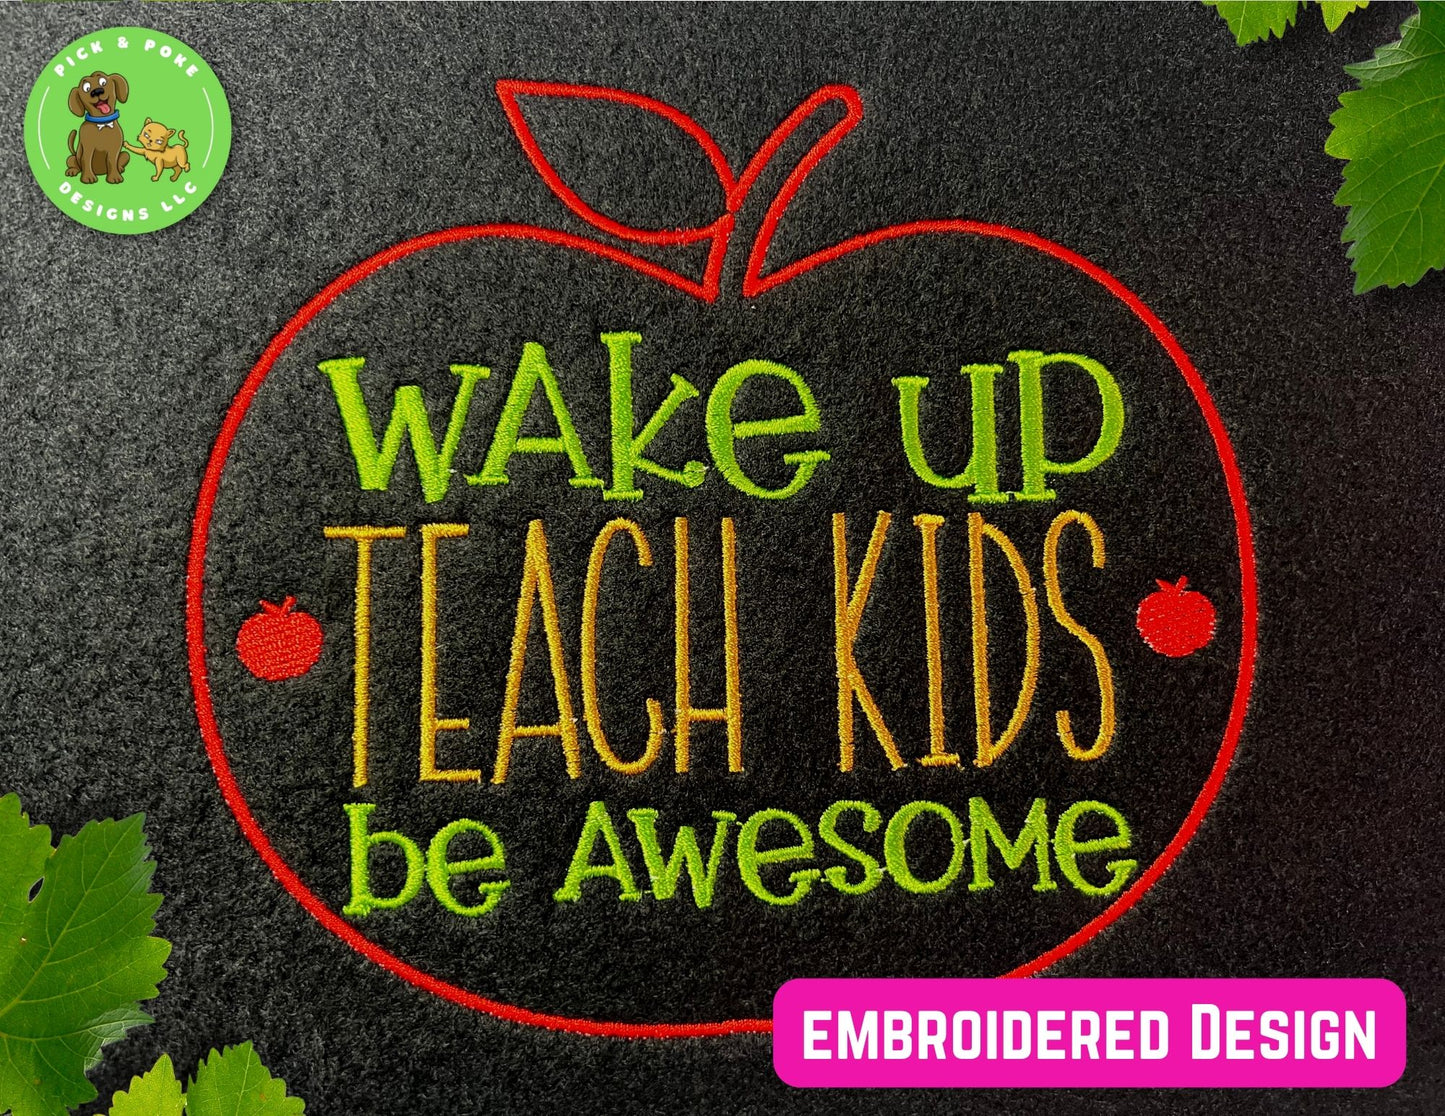 Wake Up Teach Kids Be Awesome embroidered on the shirt.